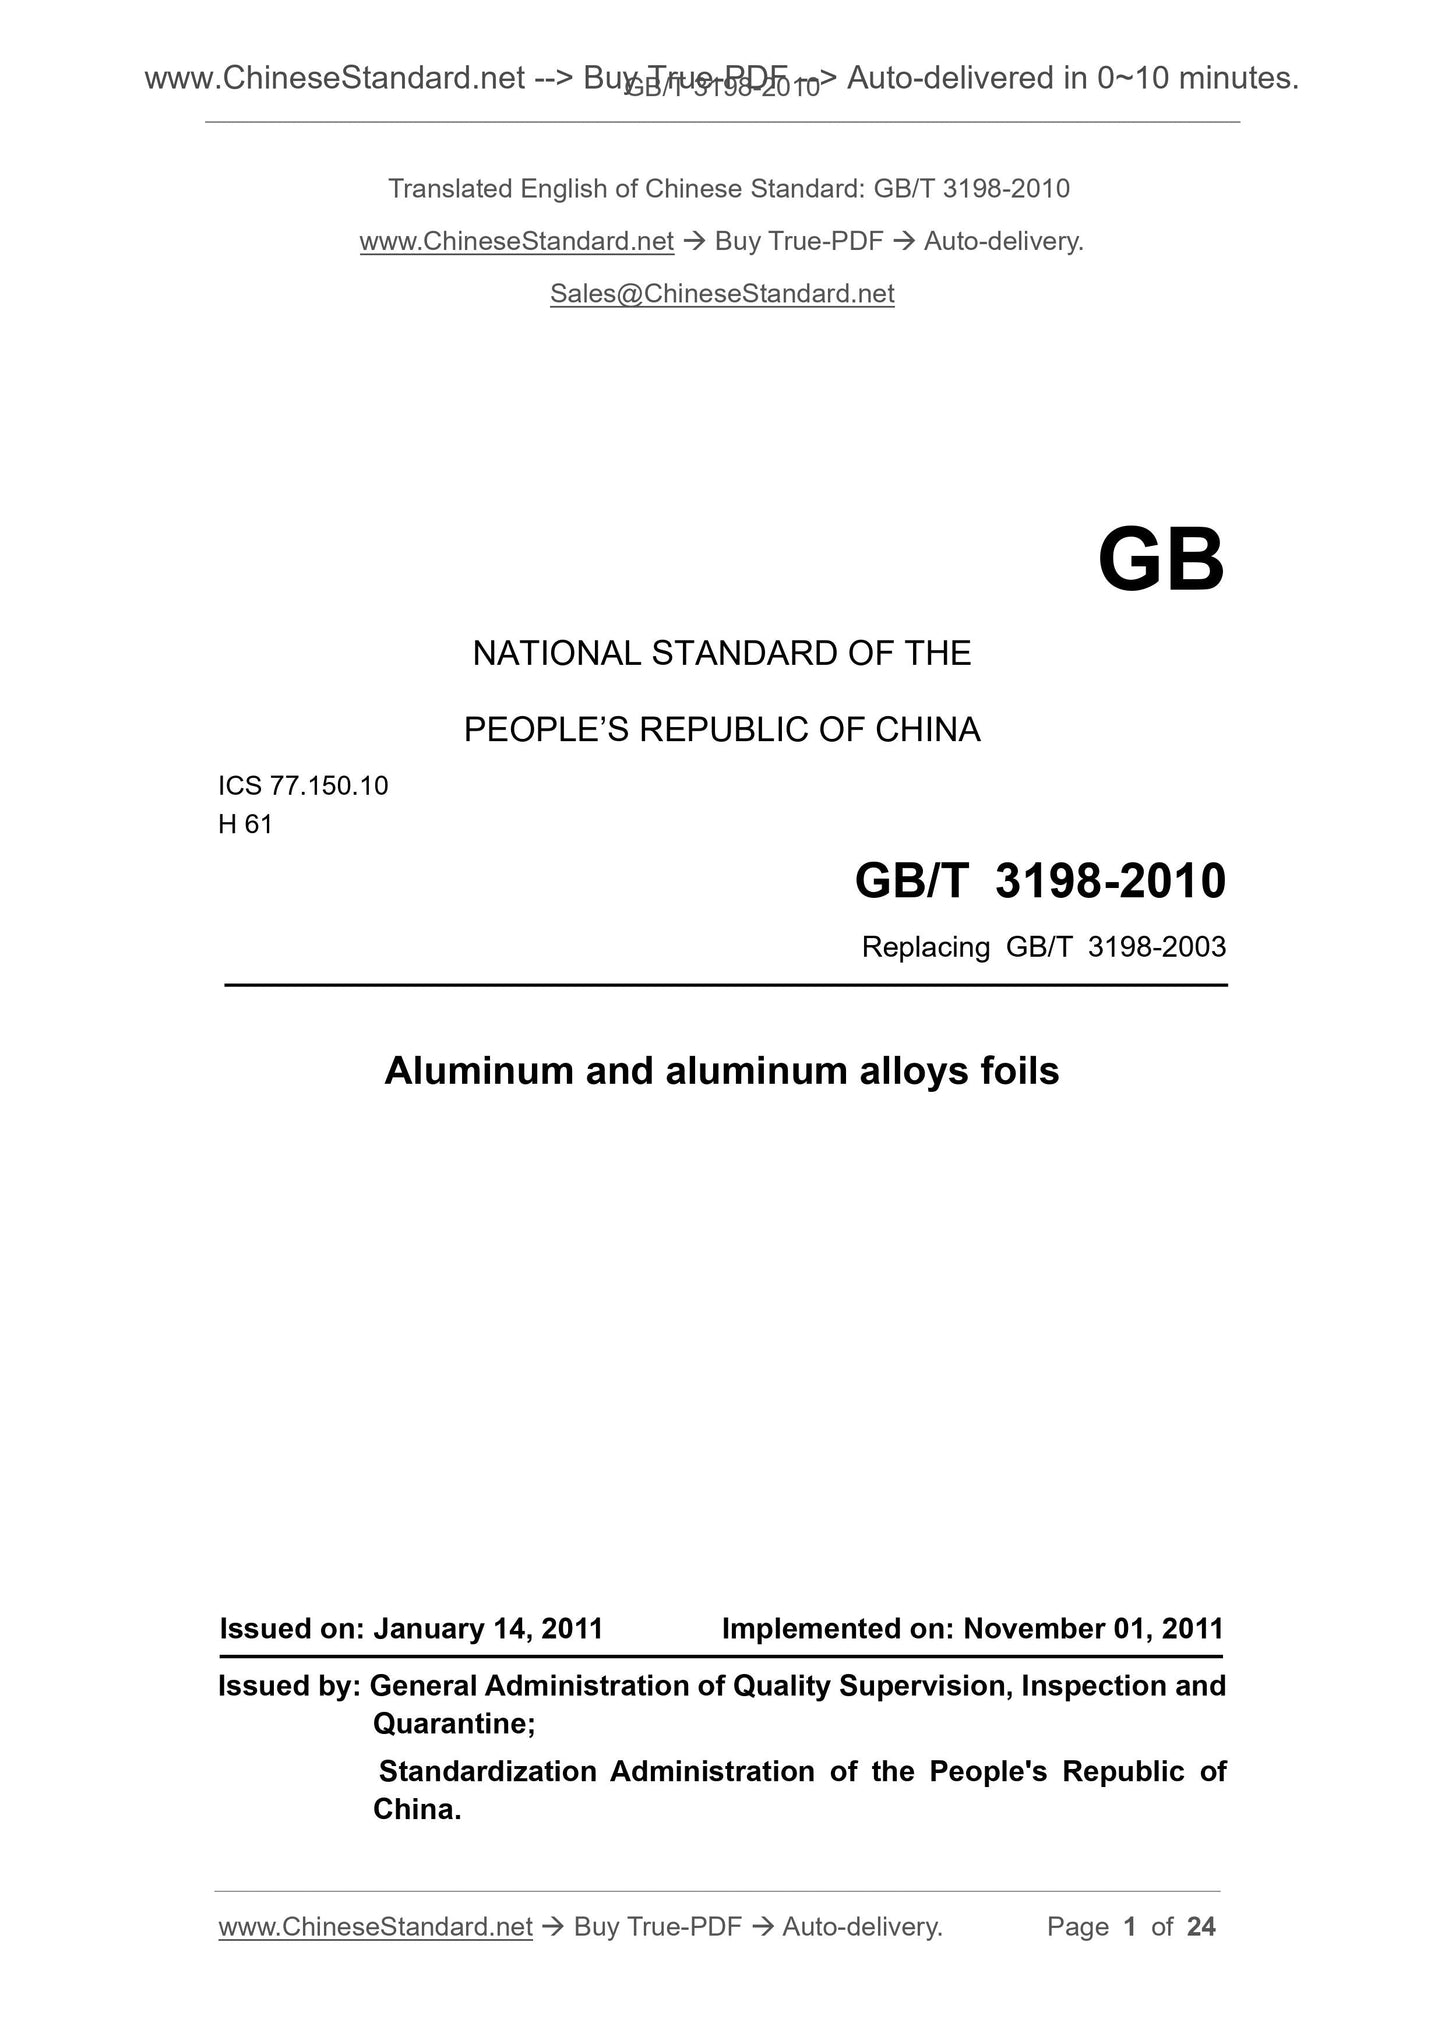 GB/T 3198-2010 Page 1